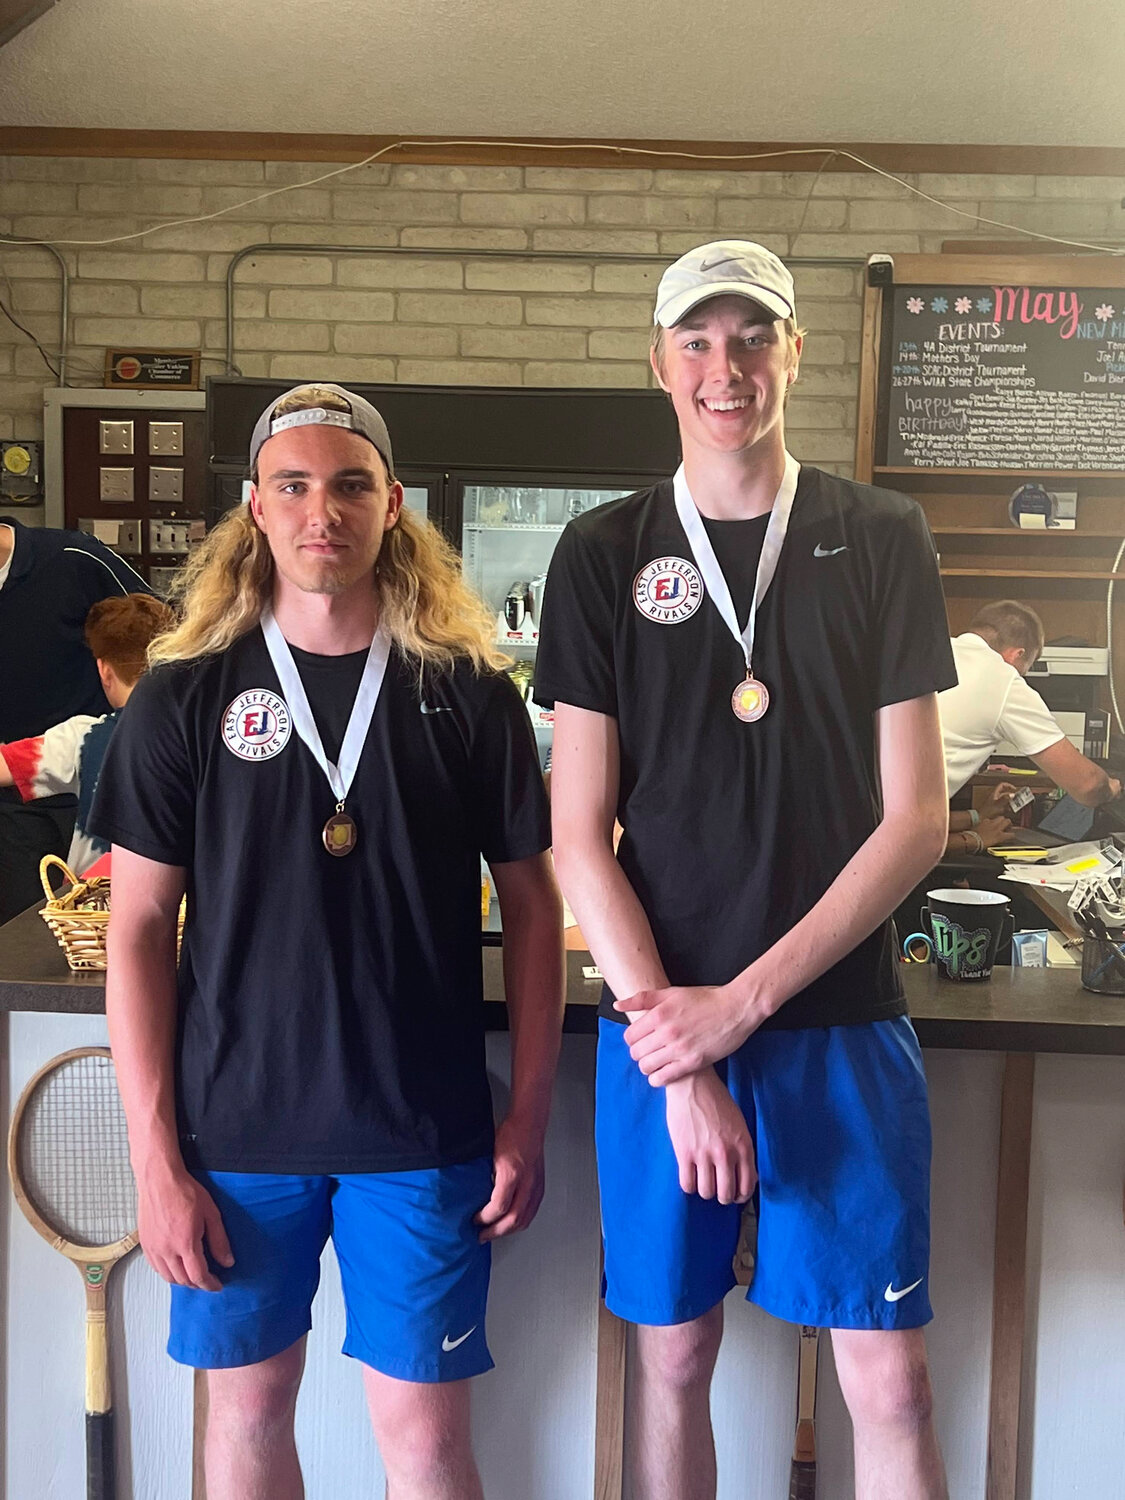 Reid Martin and Stuart Dow pose for a photo with their state medals following the state tournament in Yakima.